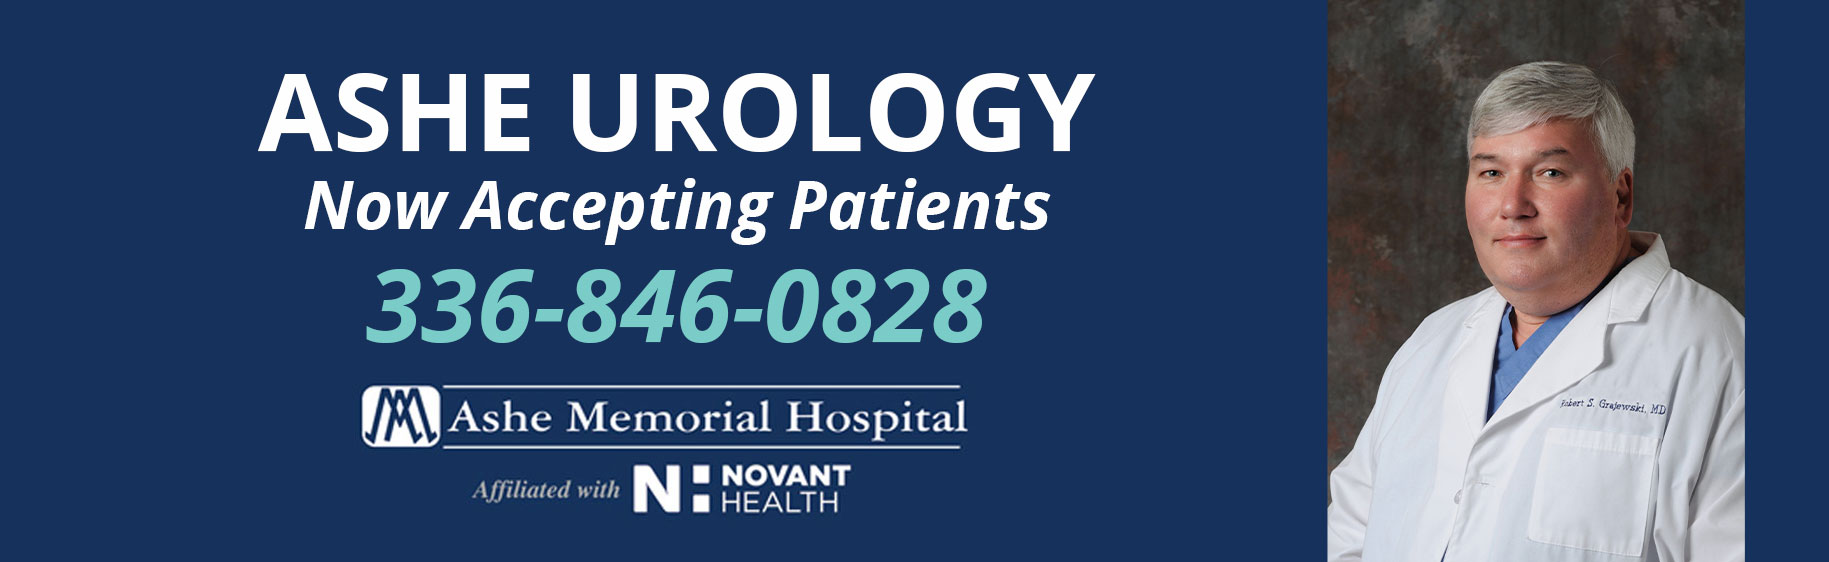 ASHE UROLOGY
Now Accepting Patients
336-846-0828
Ashe Memorial Hospital
Affiliated with N: NOVANT HEALTH